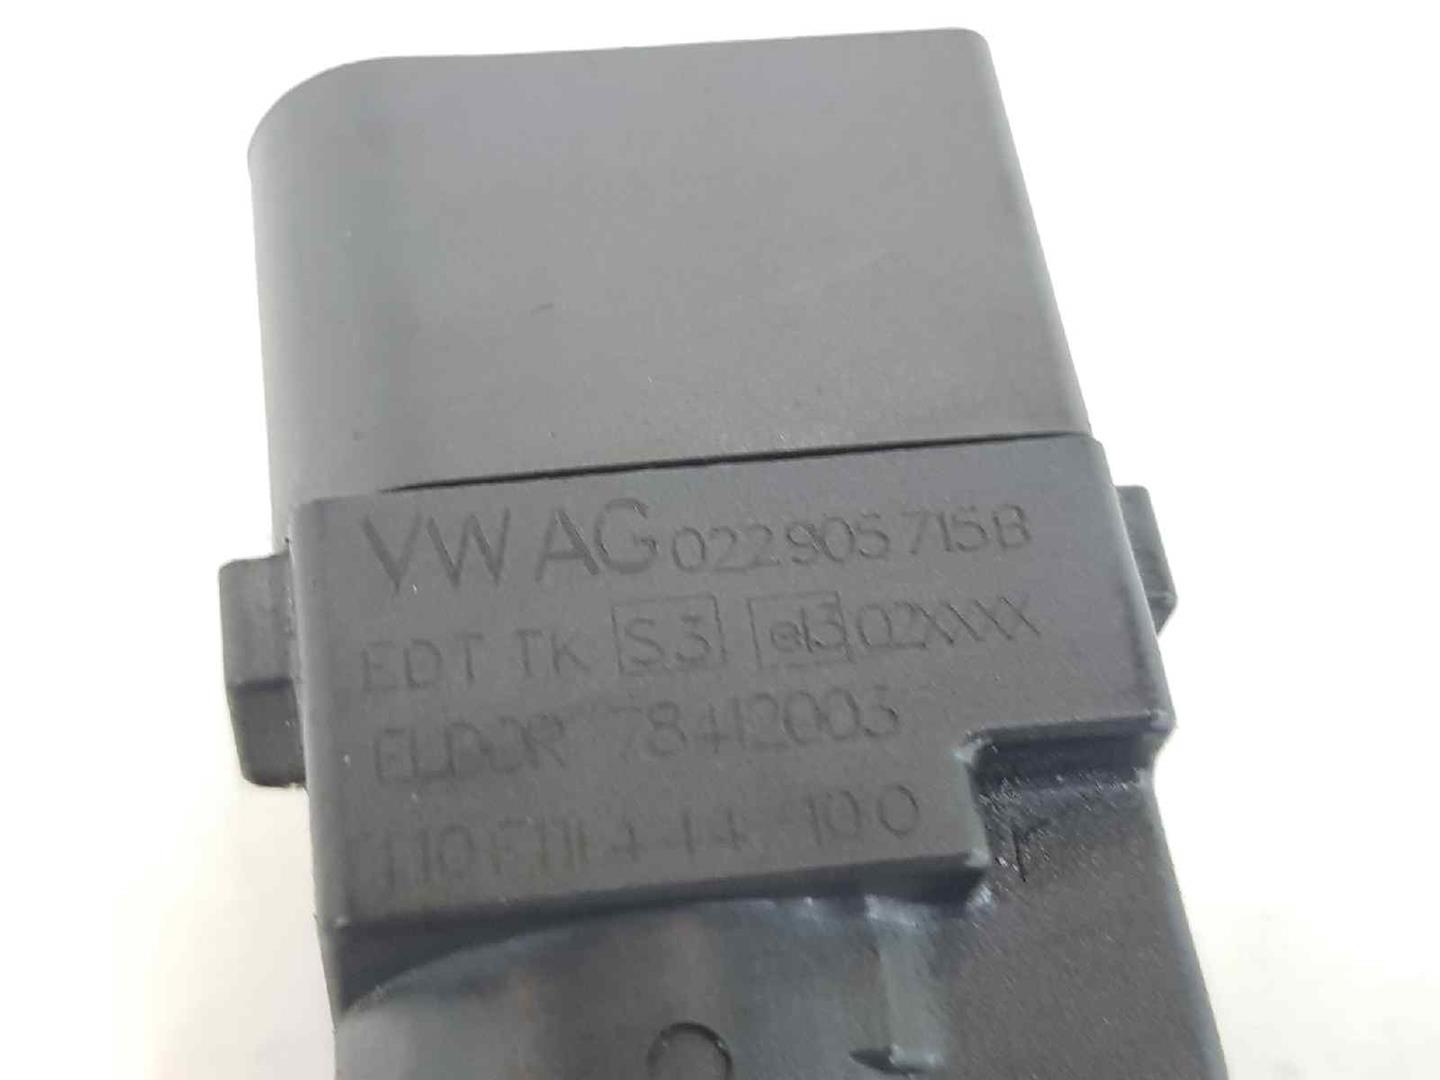 AUDI A2 8Z (1999-2005) High Voltage Ignition Coil 022905715B, 022905715B 19686169